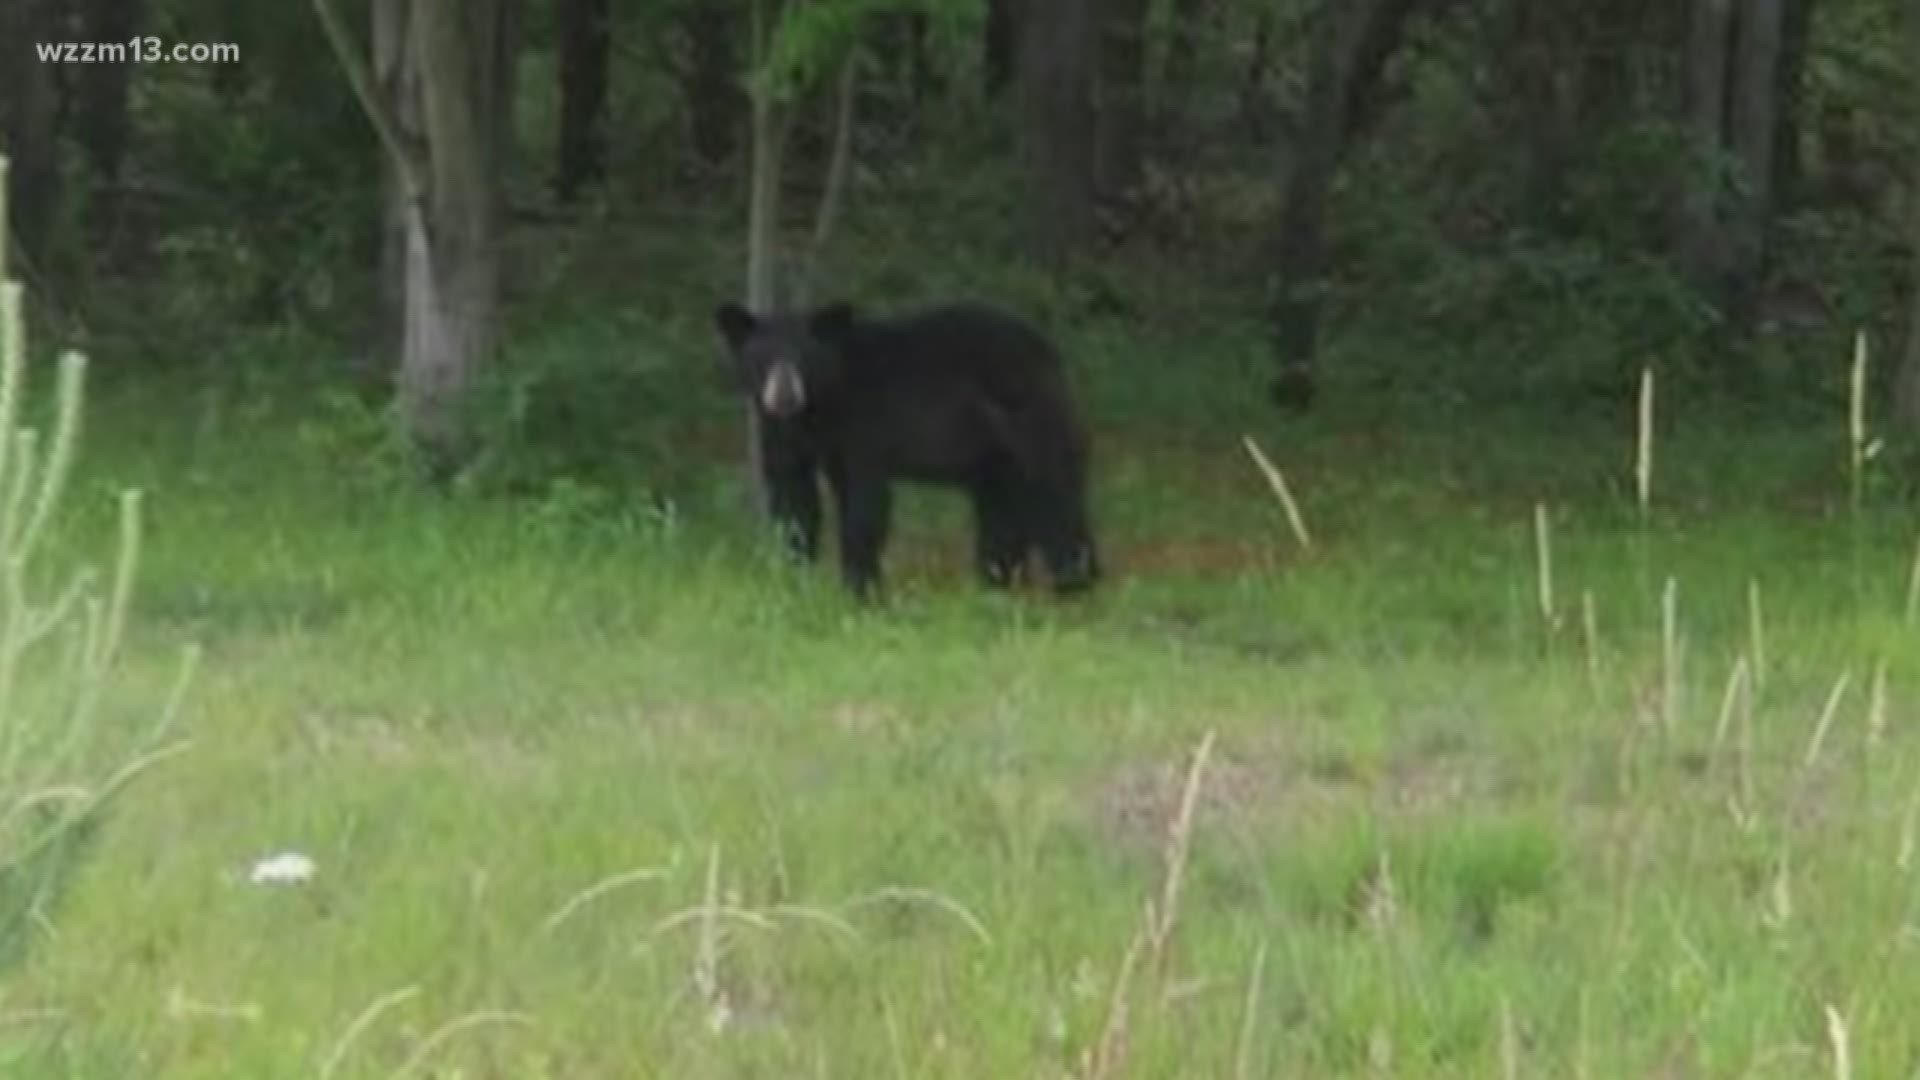 Bear spotted in Muskegon County